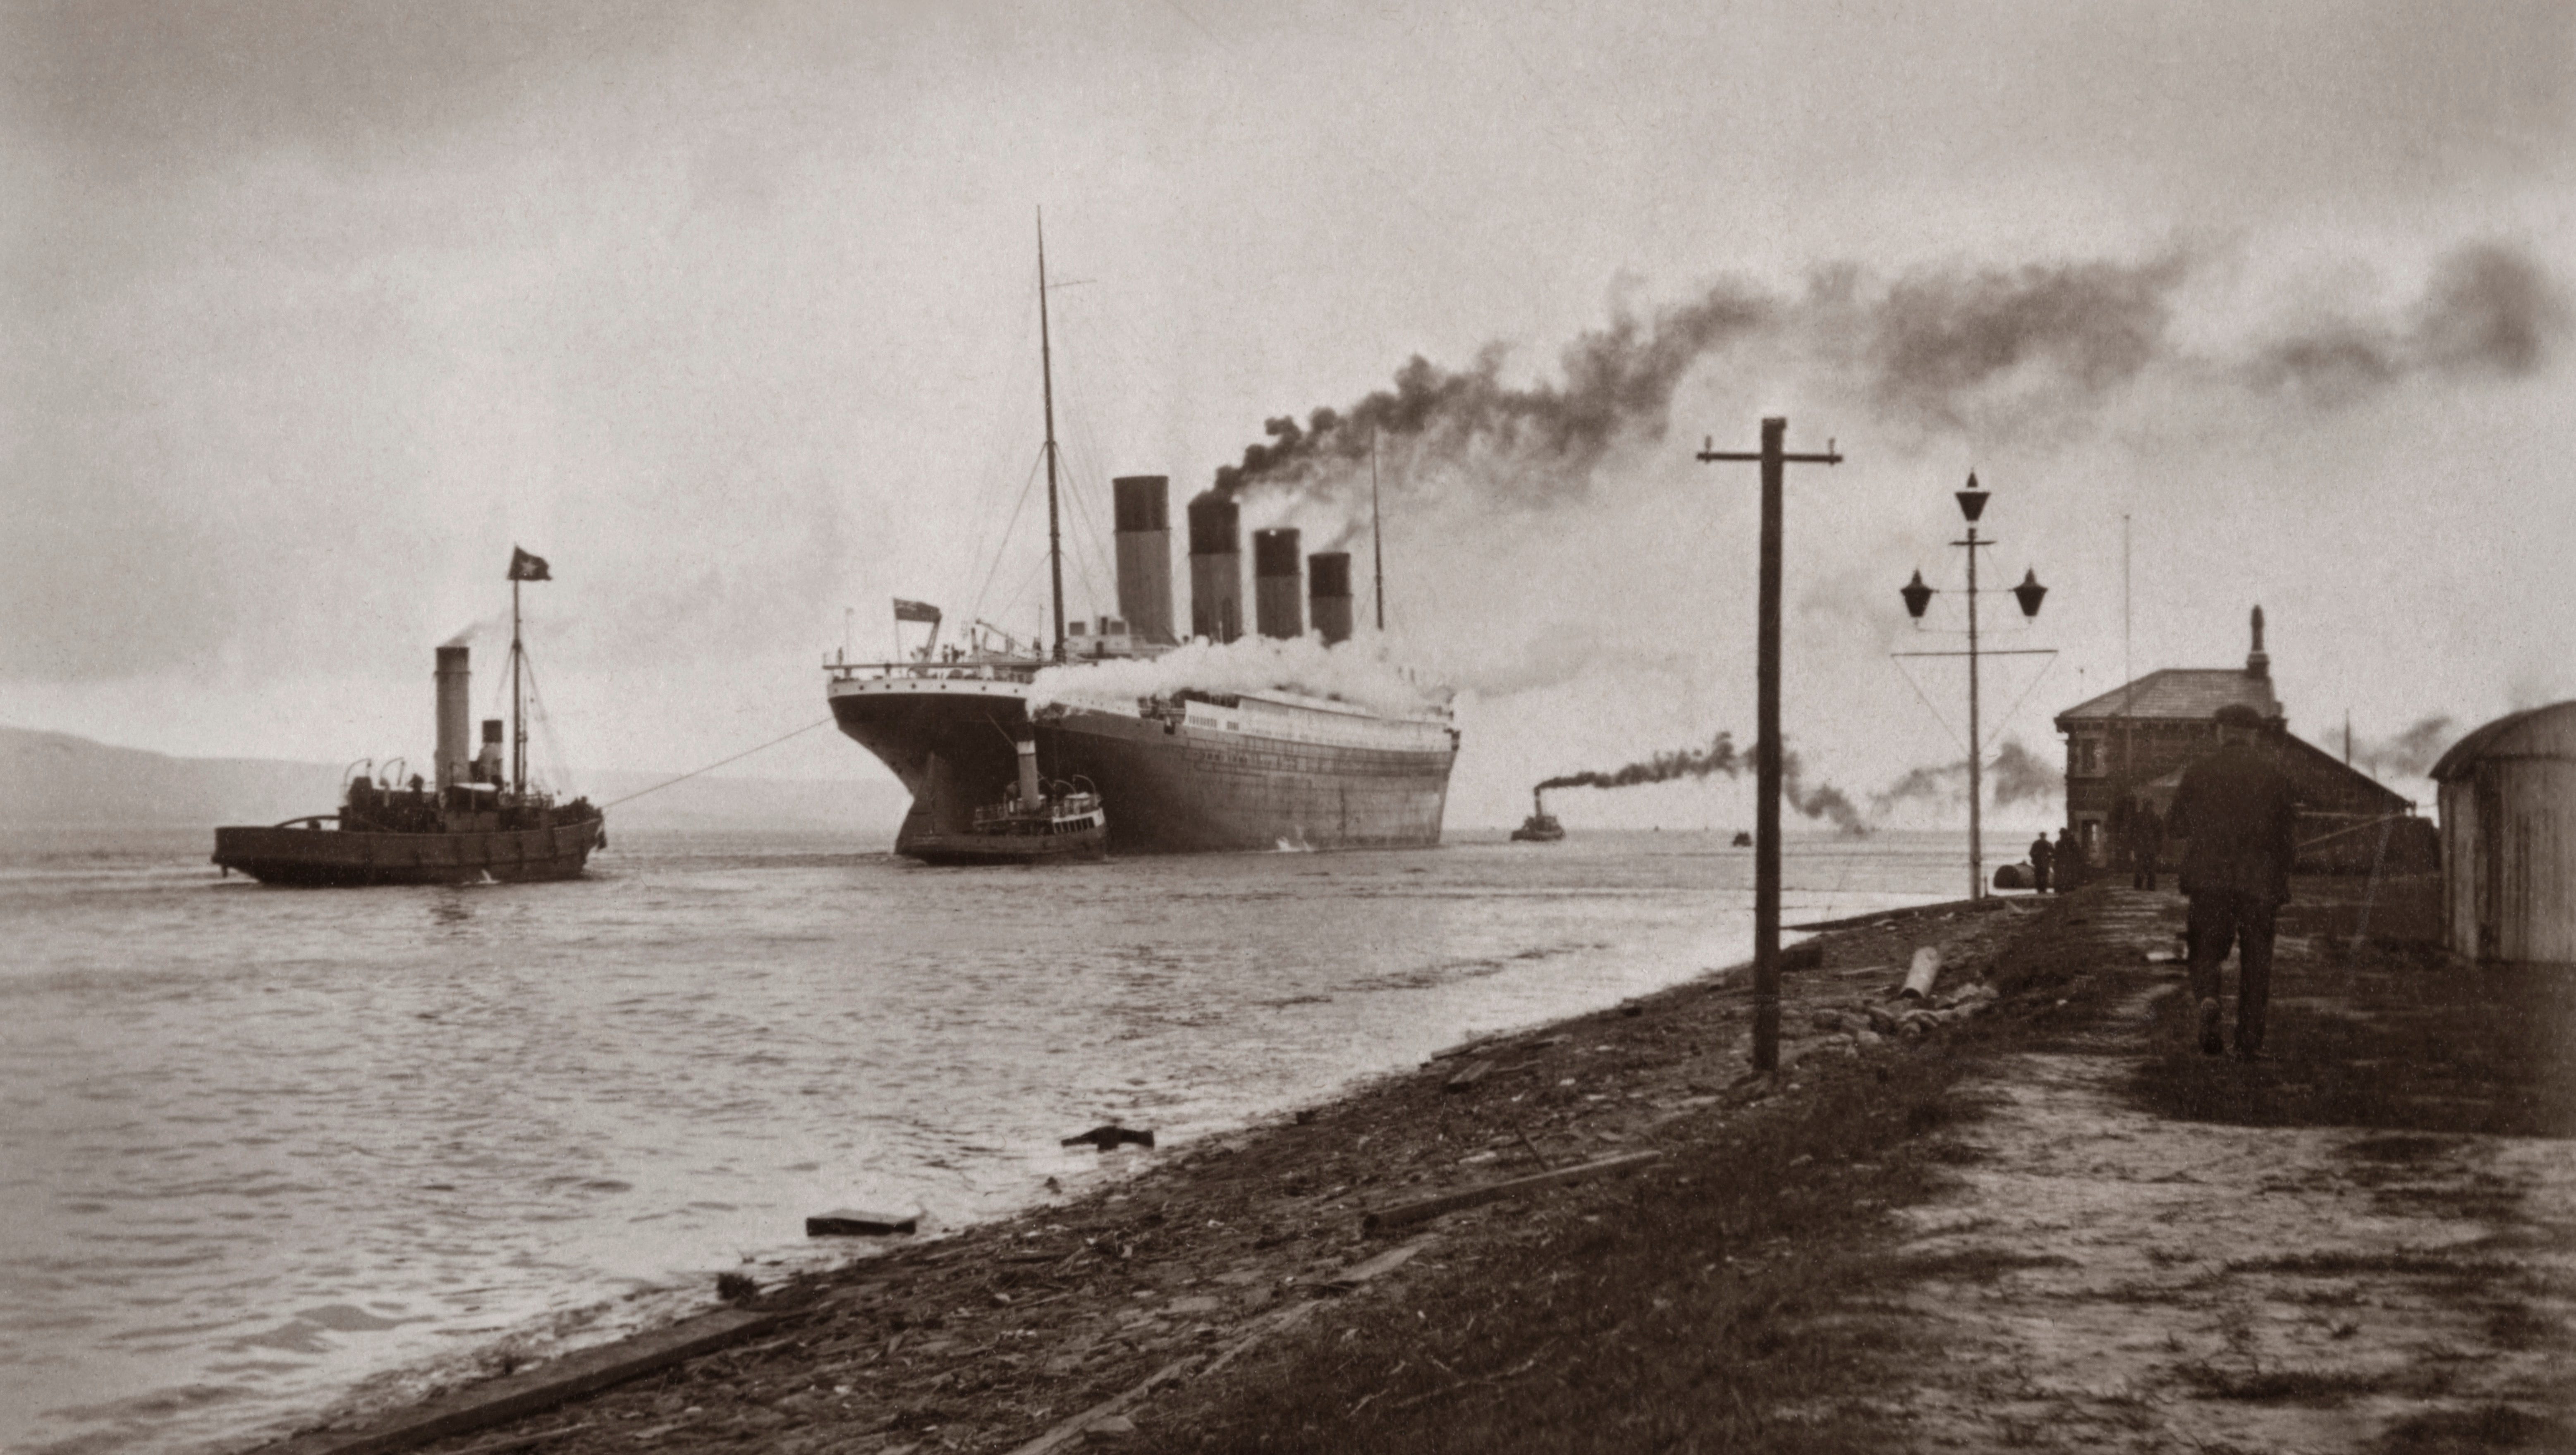 Do These Photos Unveil What Really Caused The Titanic To Sink